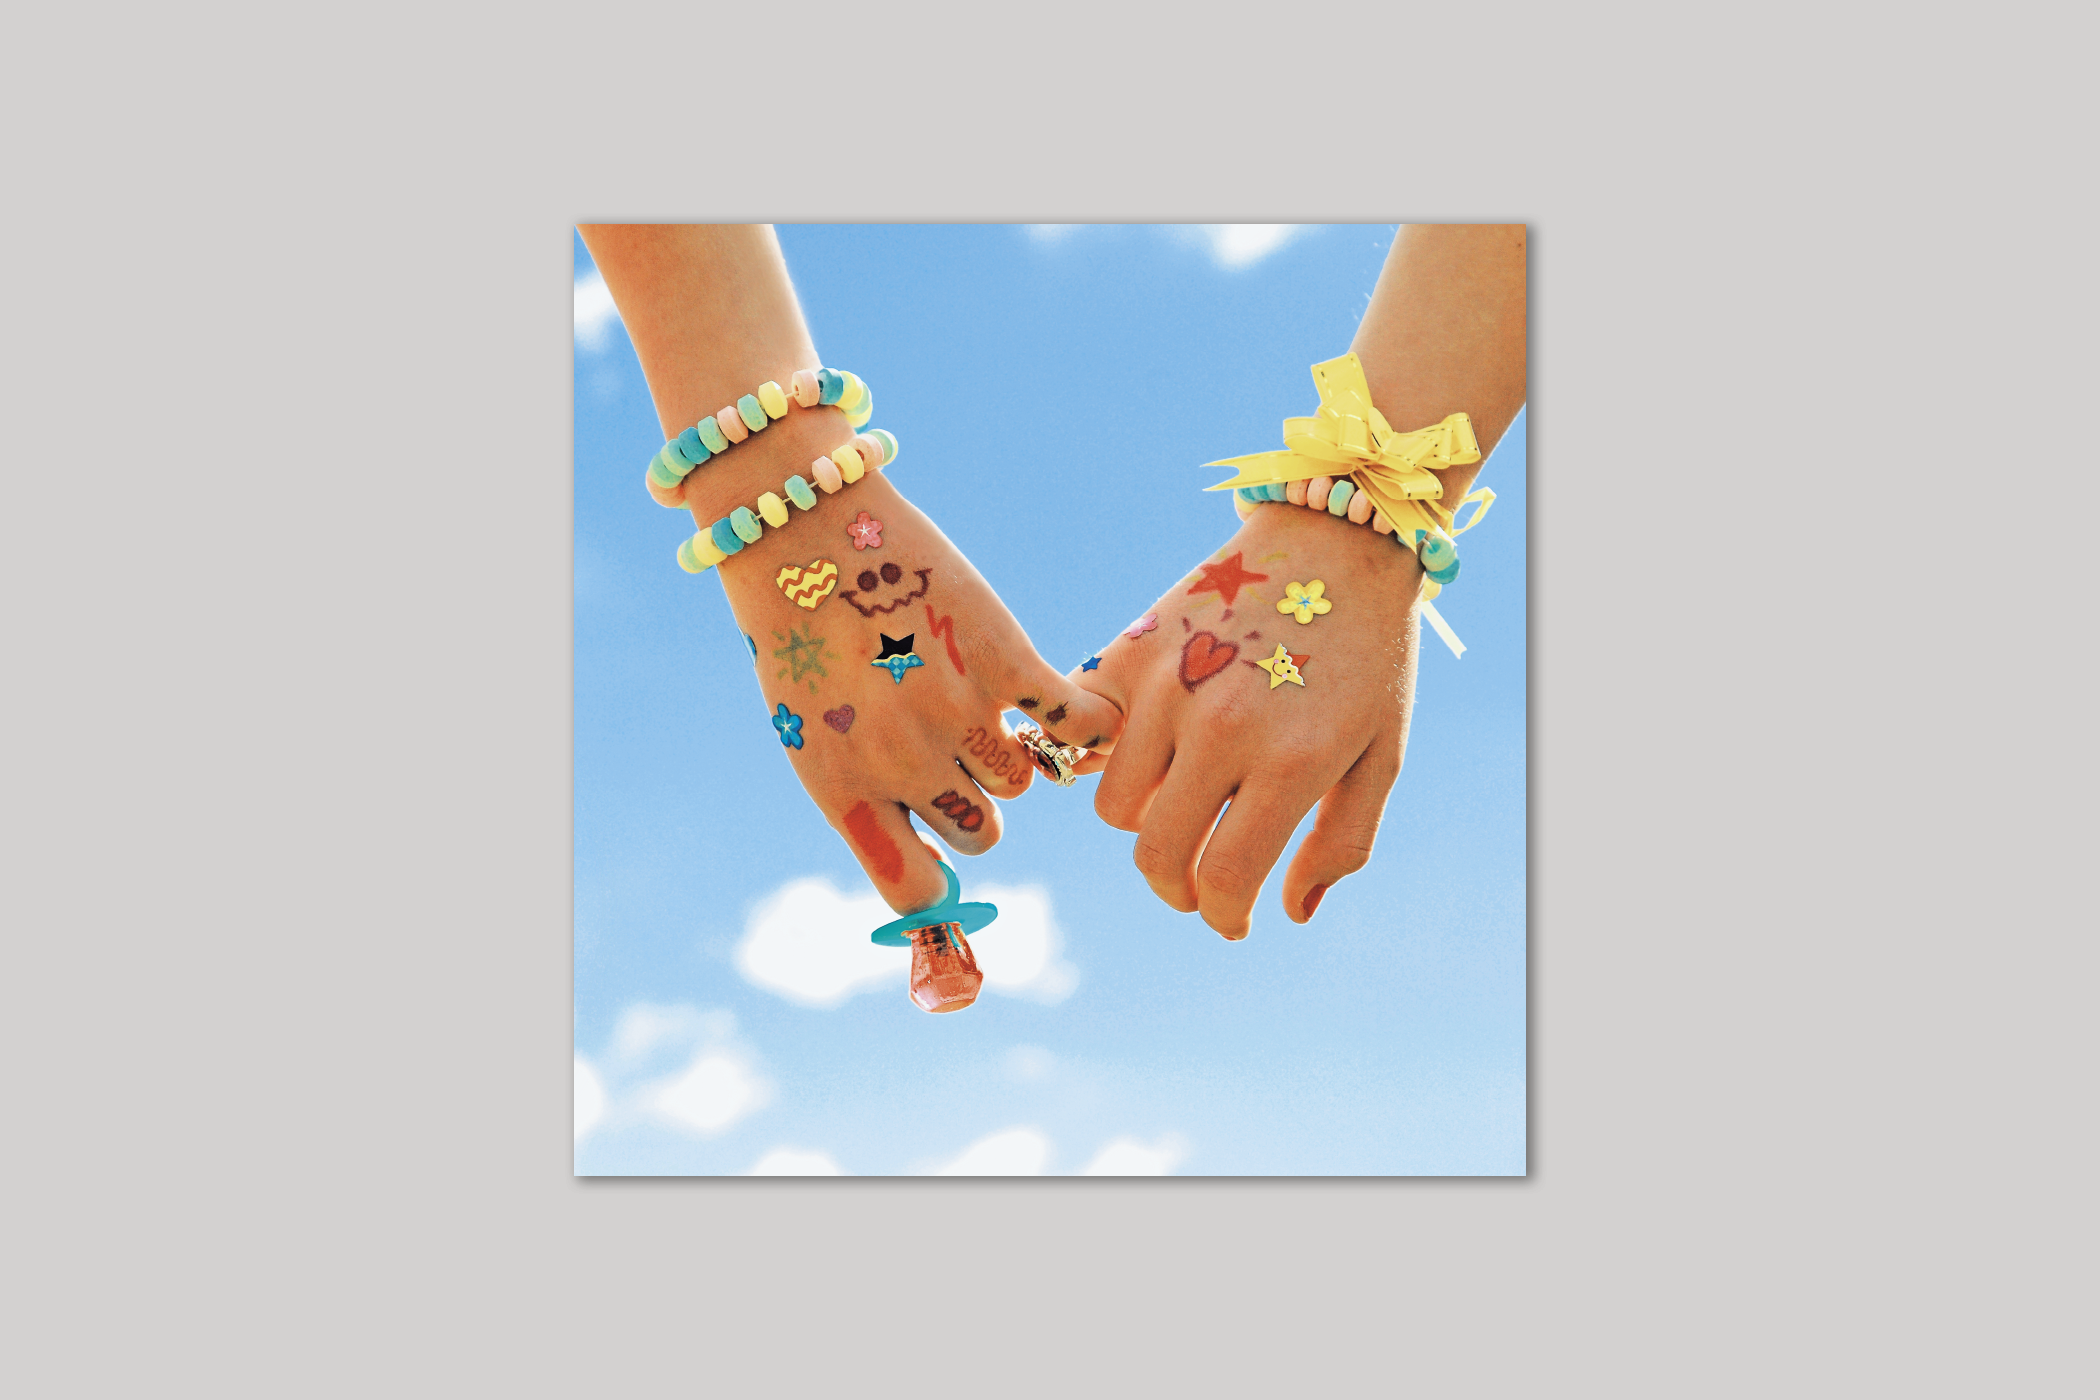 Best Friends Forever from Exposure range of photographic cards by Icon.